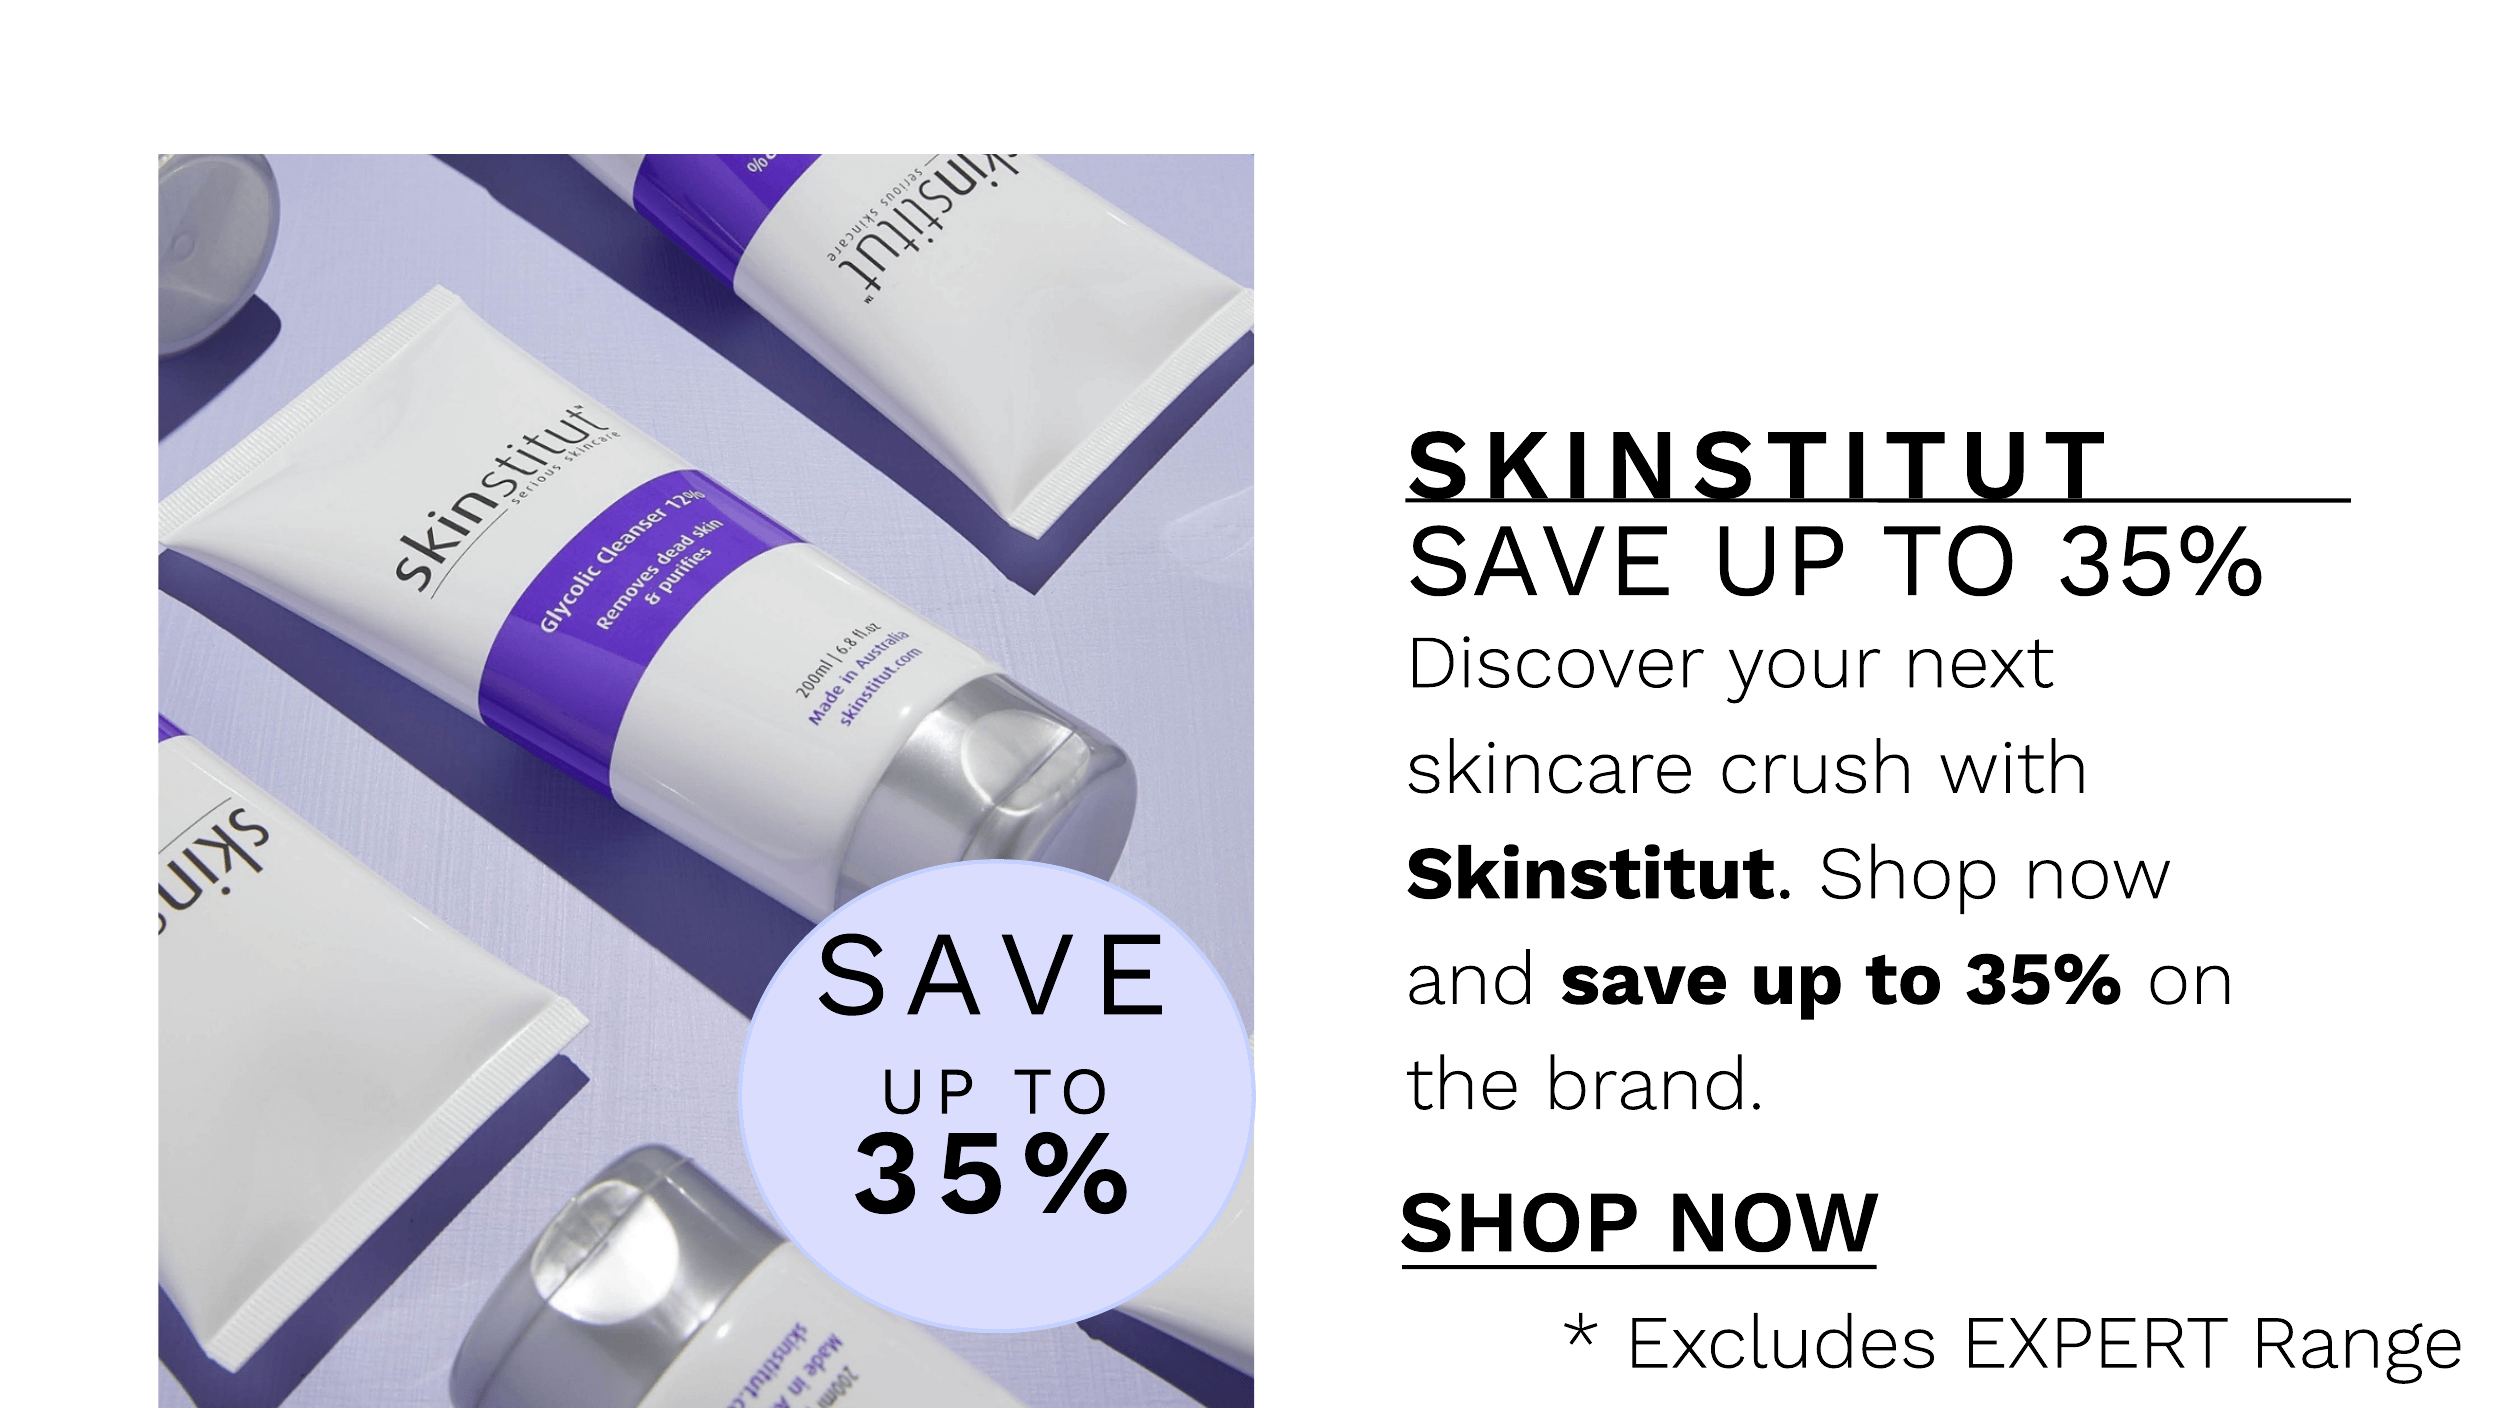  SAVE UP TO 35% Discover your next skincare crush with Skinstitut. Shop now and save up to 35% on the brand. SHOP NOW * Excludes EXPERT Range 